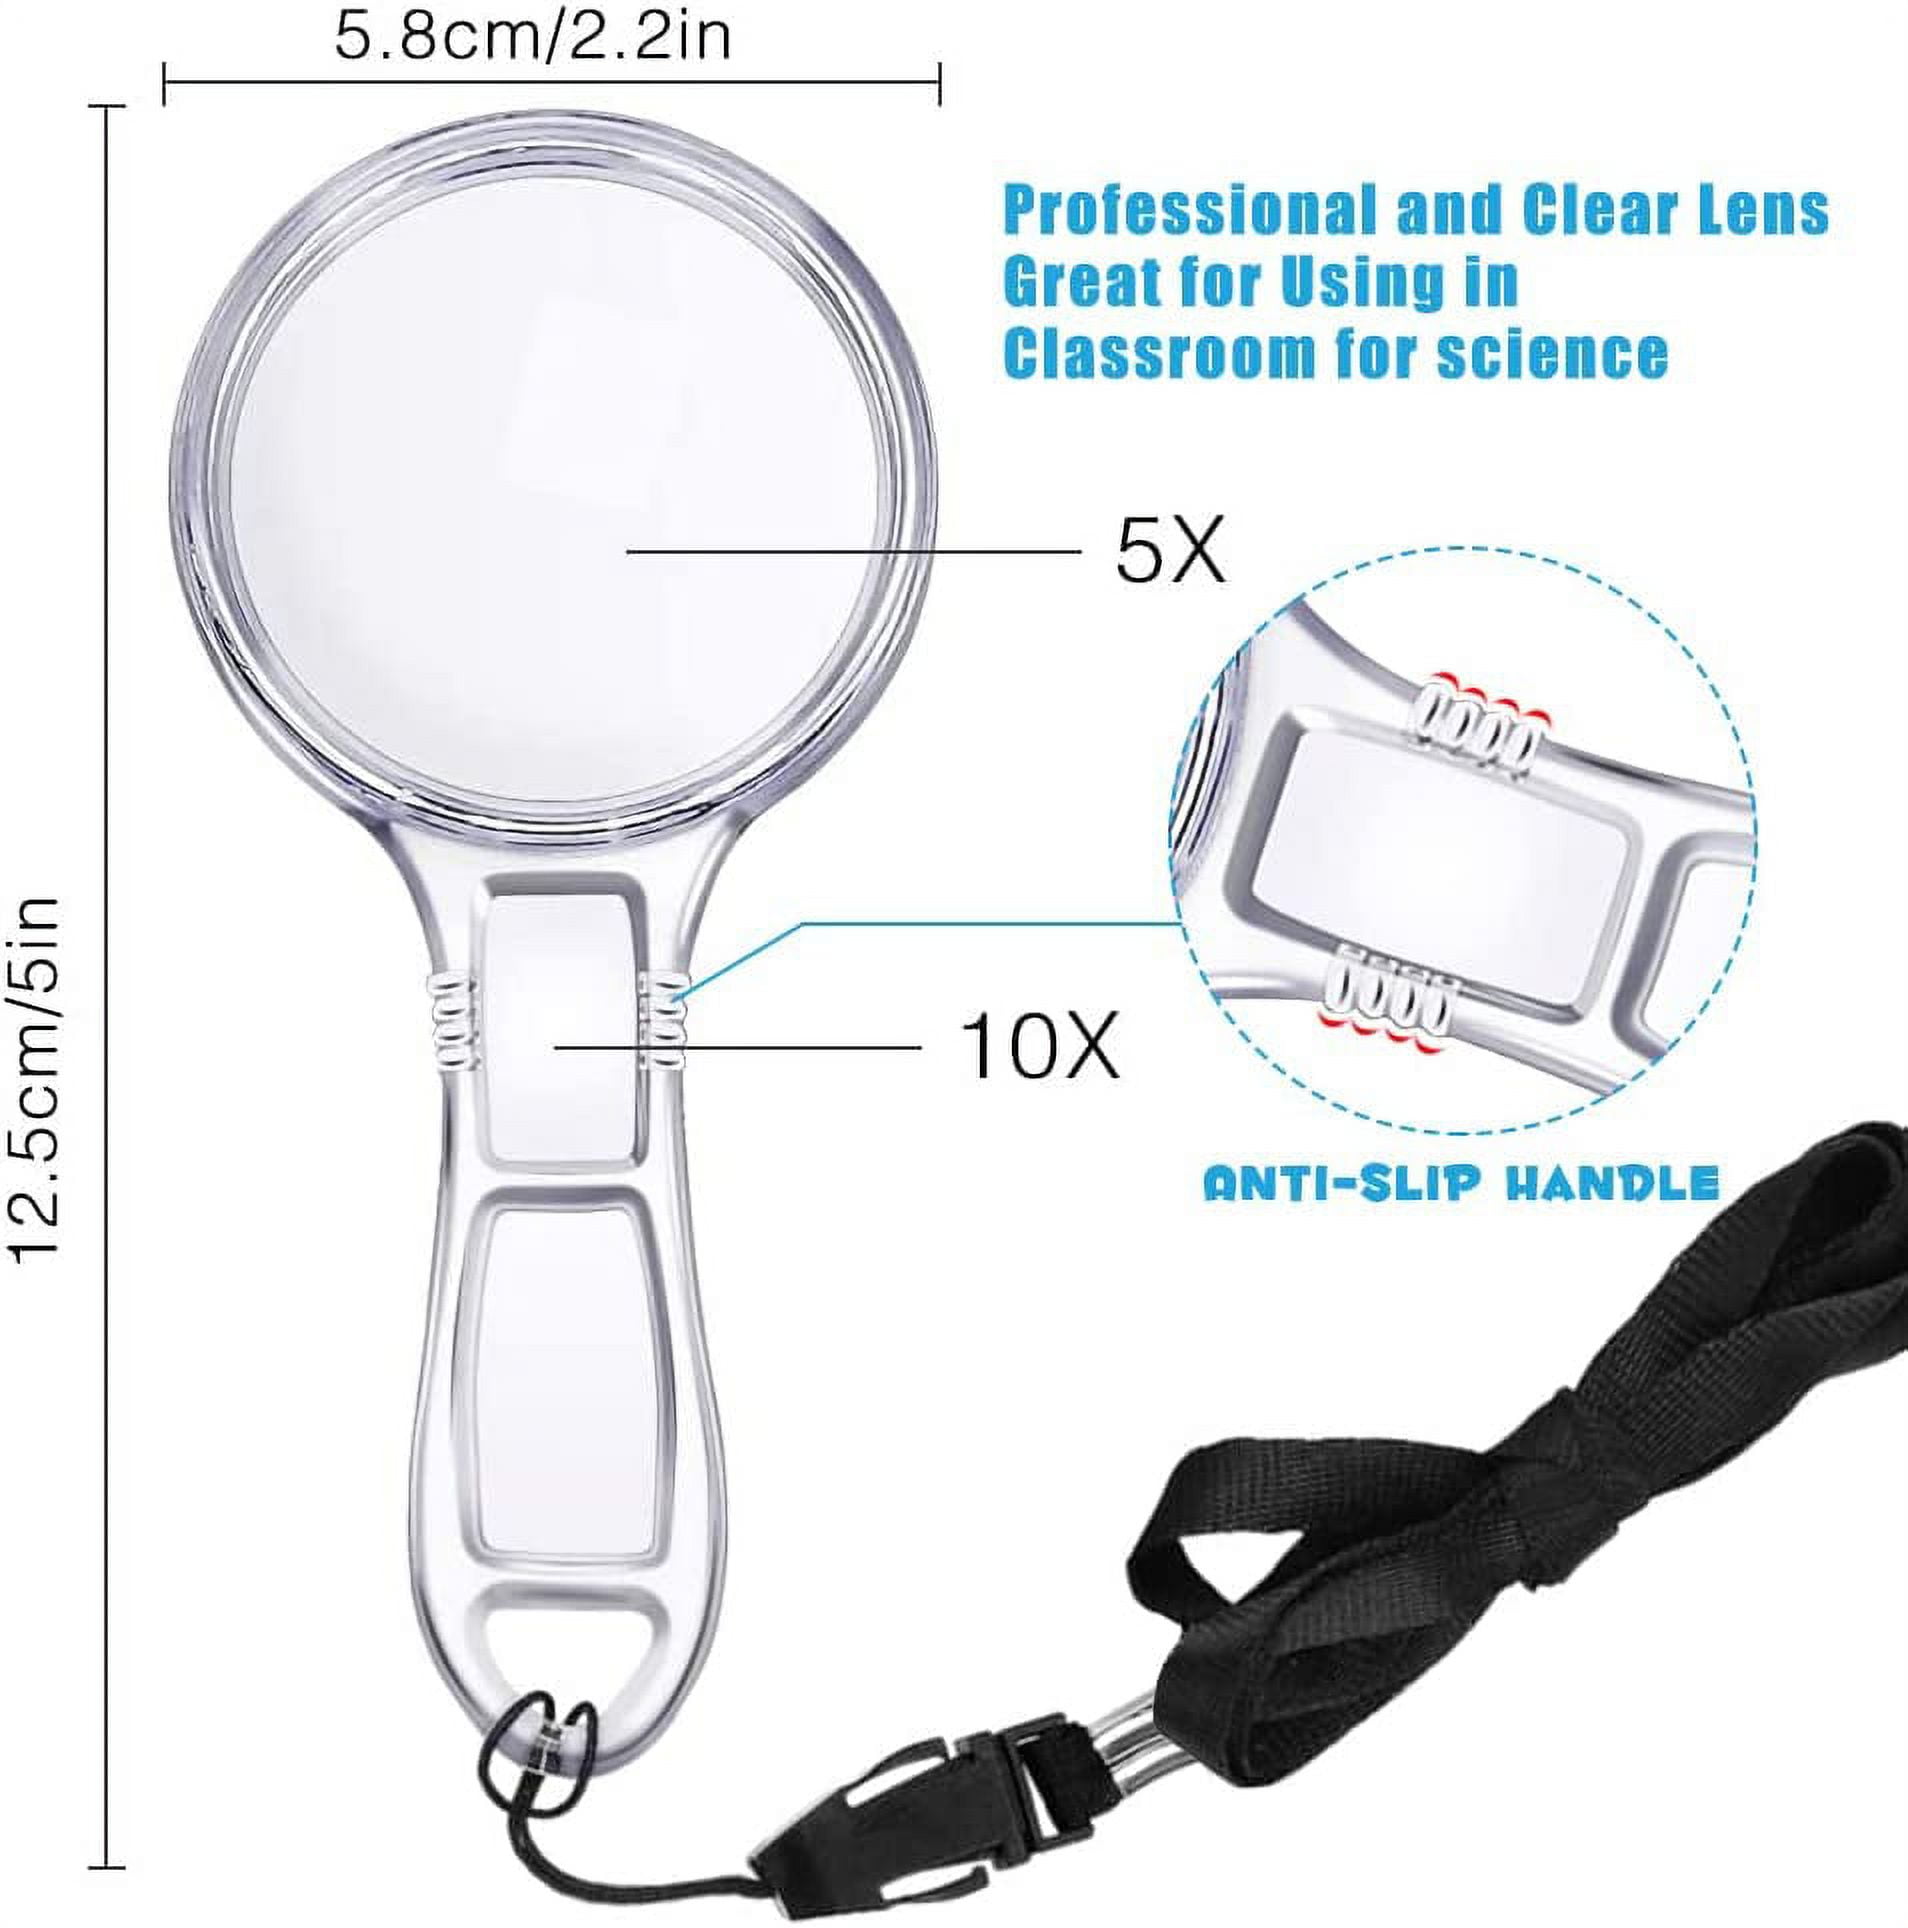 Heldig 2pcs 10x Small Pocket Magnify Glass Premium Folding Mini Magnifying  Glass with Rotating Protective Leather Sheath, Apply to Reading, Science,  Jewelry, Hobbies, Books, 